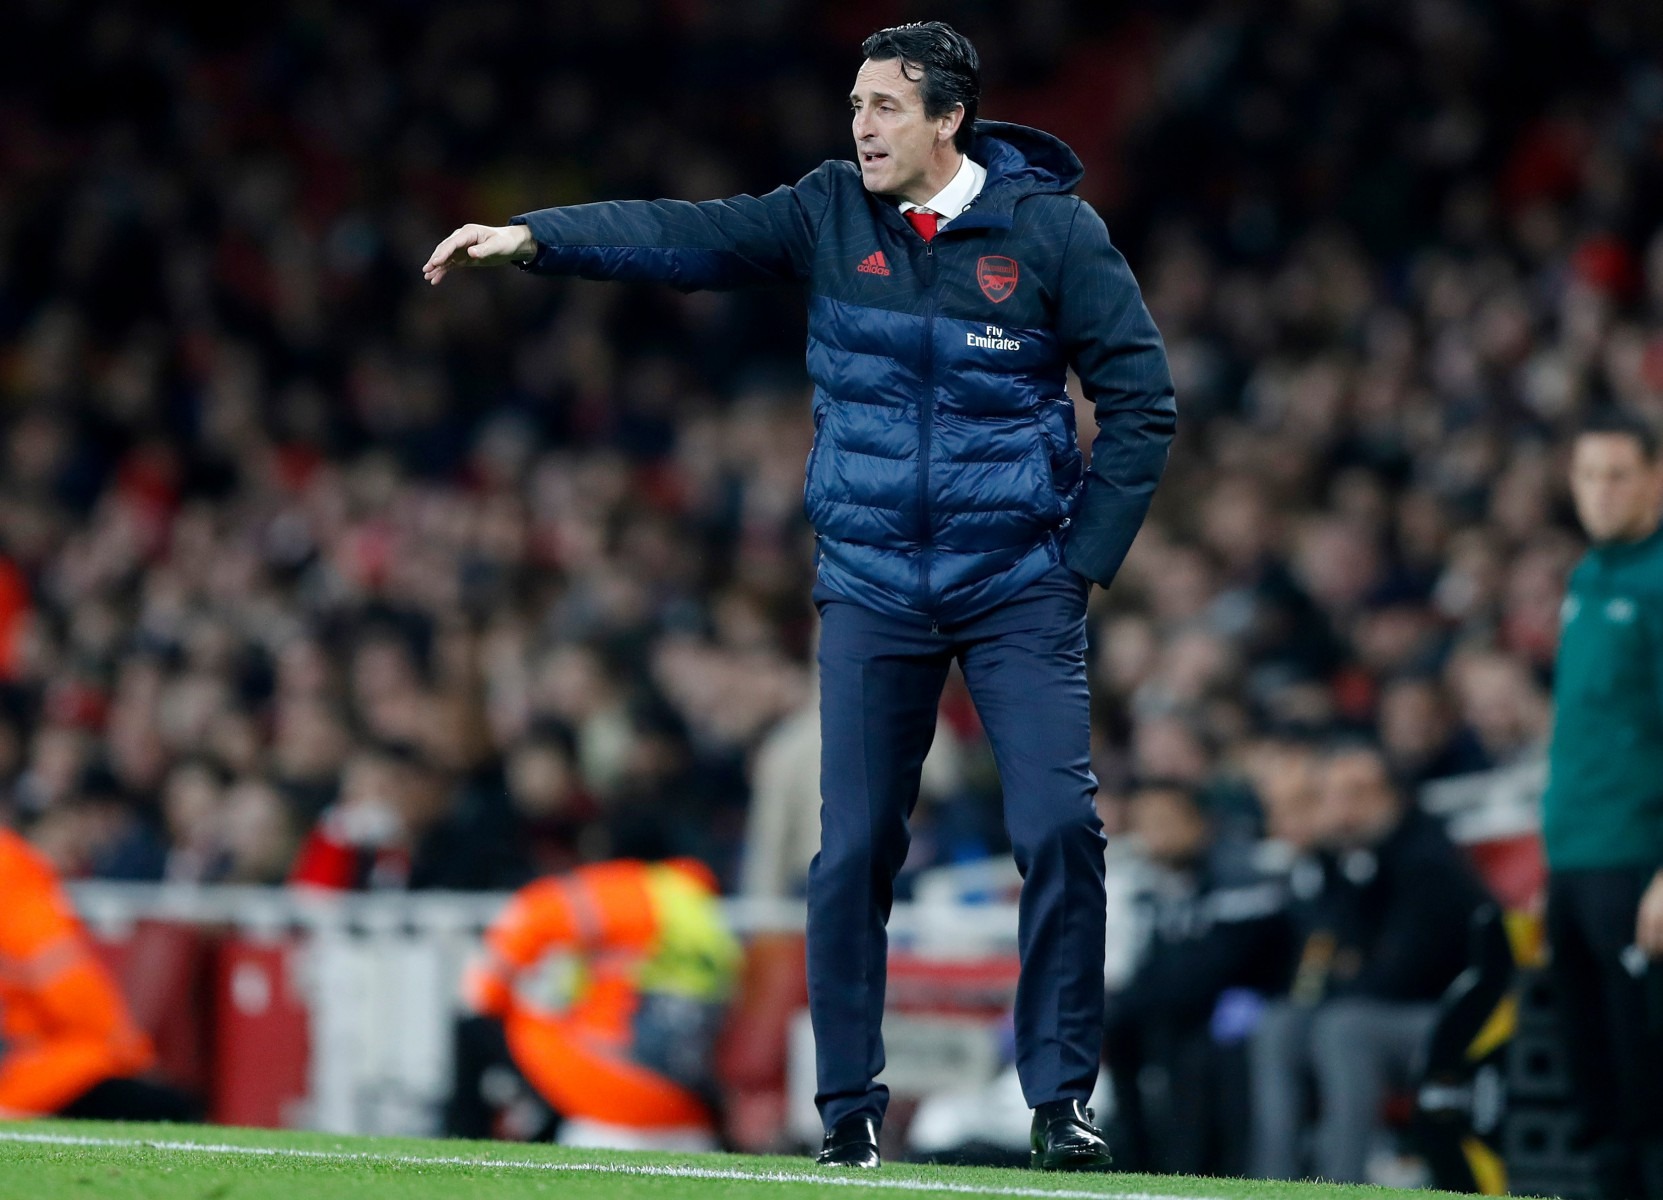 Unai emery must not be fooled by Arsenal's dramatic victory as their defensive problems remain